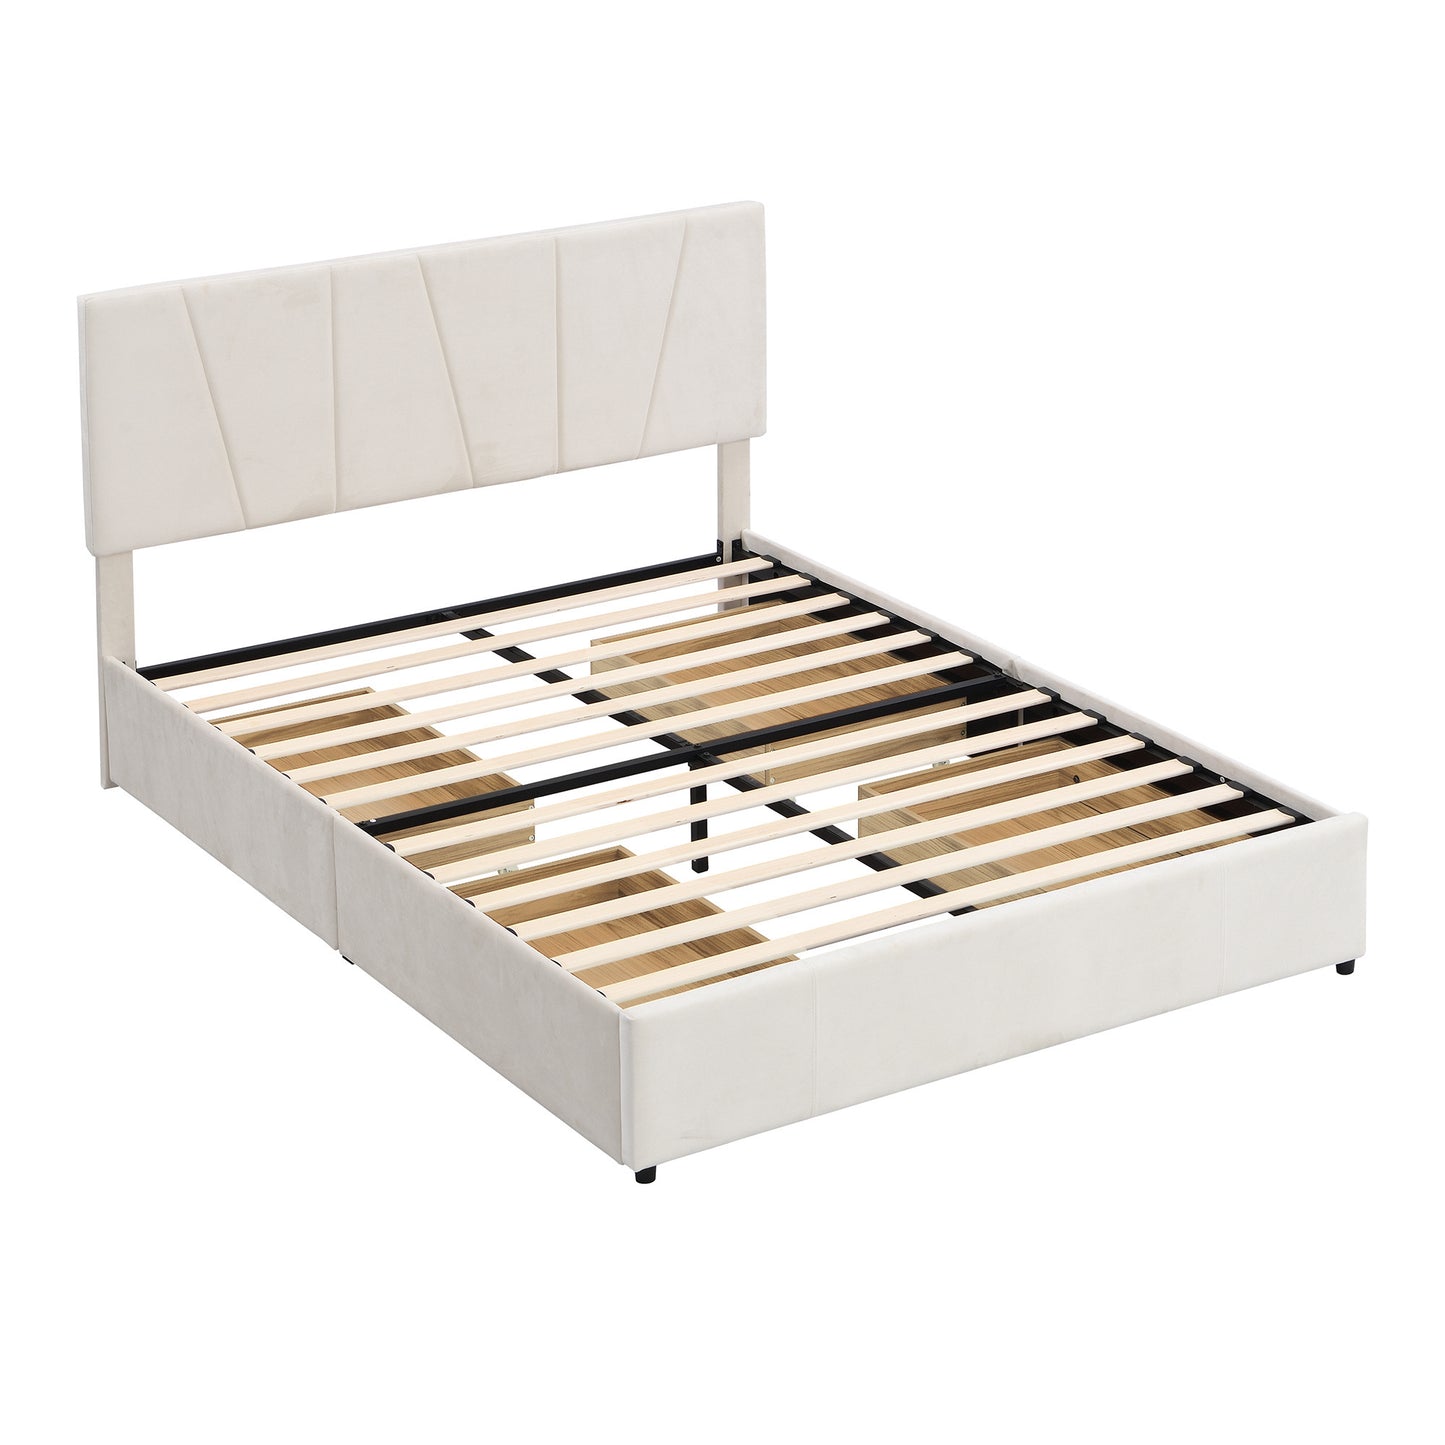 Queen Size Upholstery Platform Bed with Four Drawers on Two Sides, Adjustable Headboard, Beige(Old SKU: WF291774AAA)